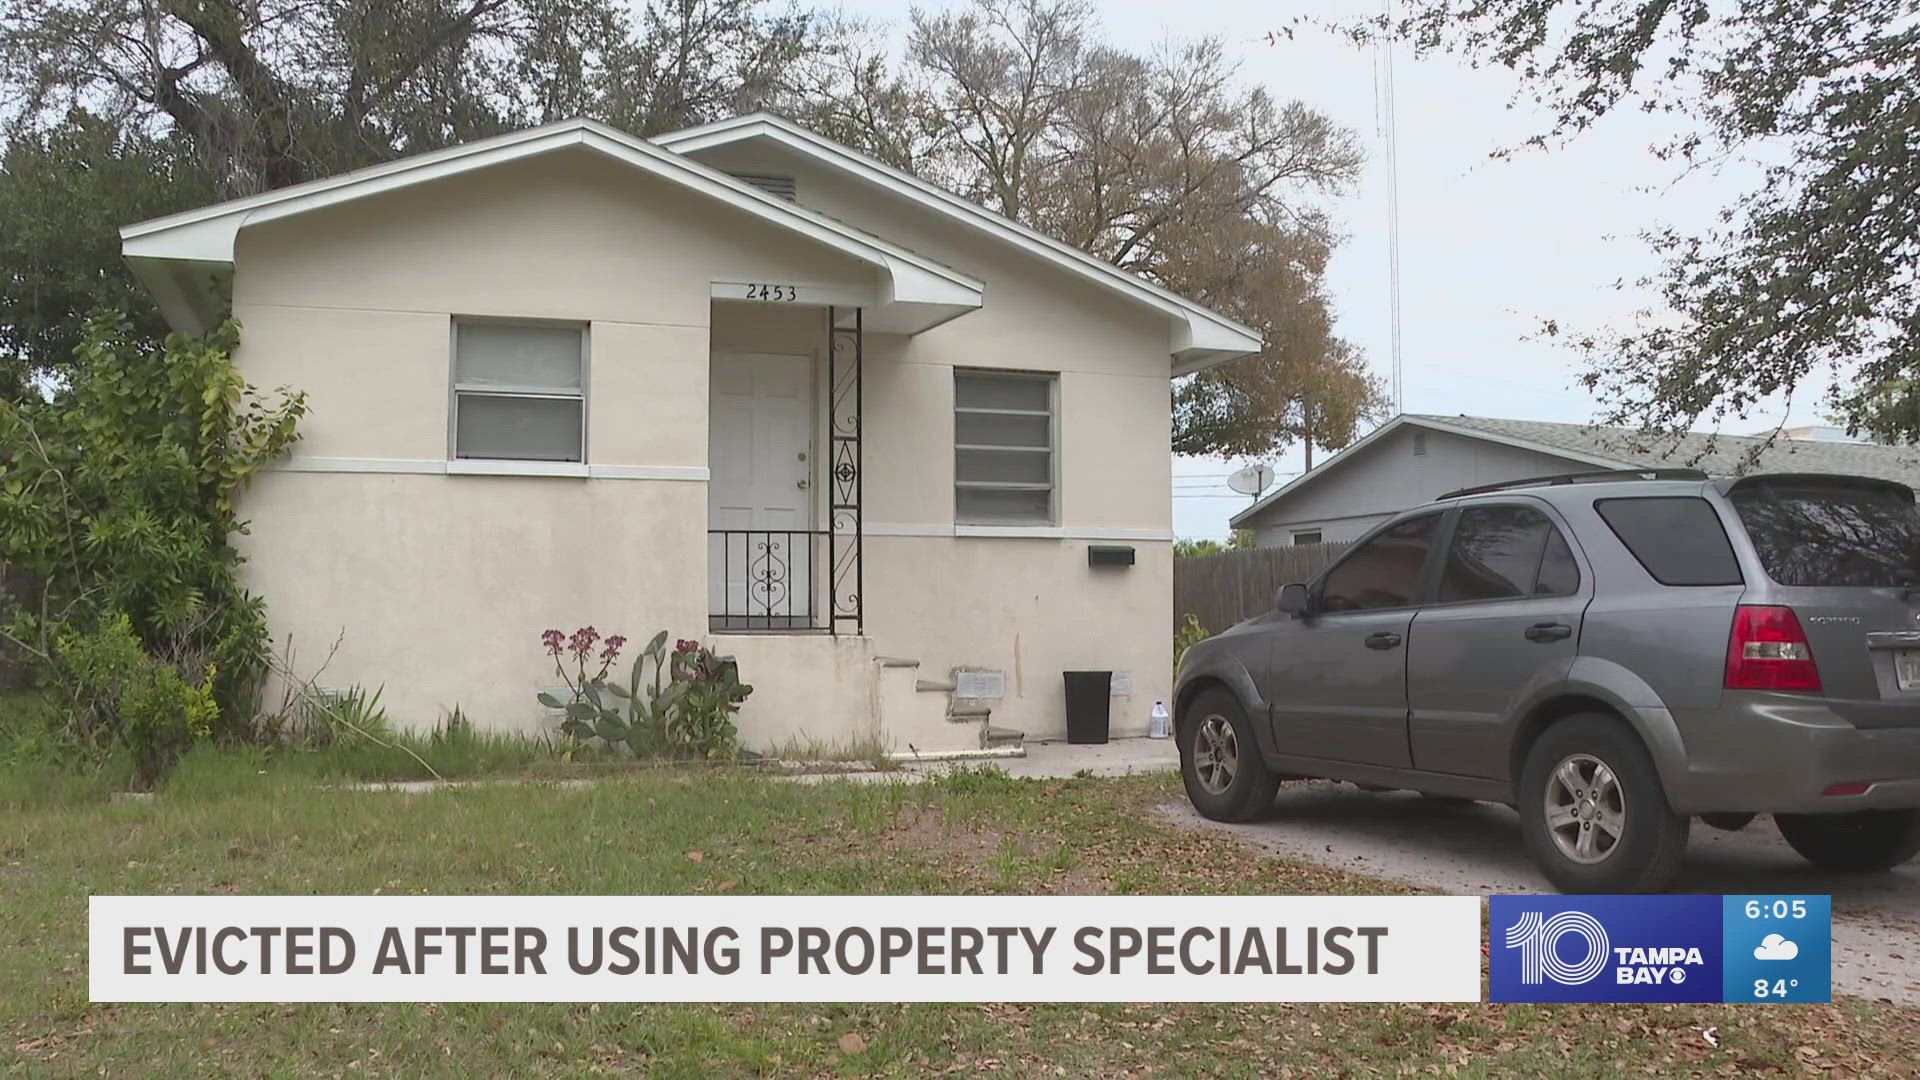 A Tampa Bay-area woman says she’s now homeless after paying rent on a house she learned was never in her name in the first place.